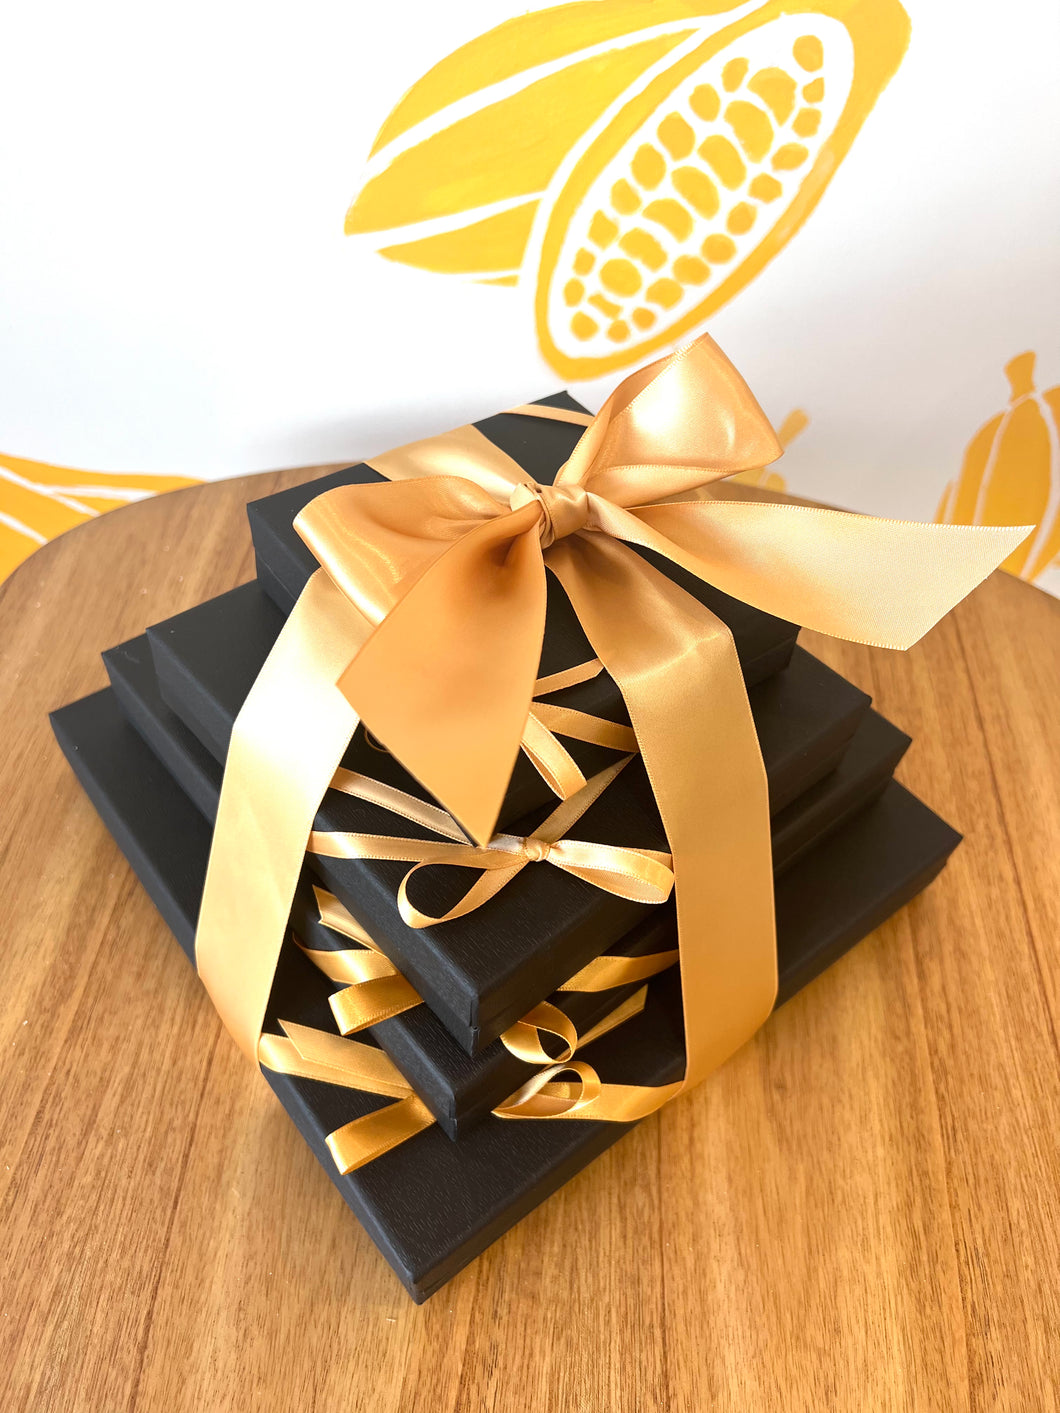 Gift Tower - Cocoa40 Inc. - Best Gourmet Chocolate Gifts in Toronto! Our chocolates and confections are made by hand in Richmond Hill, Canada. Shop small and support local.